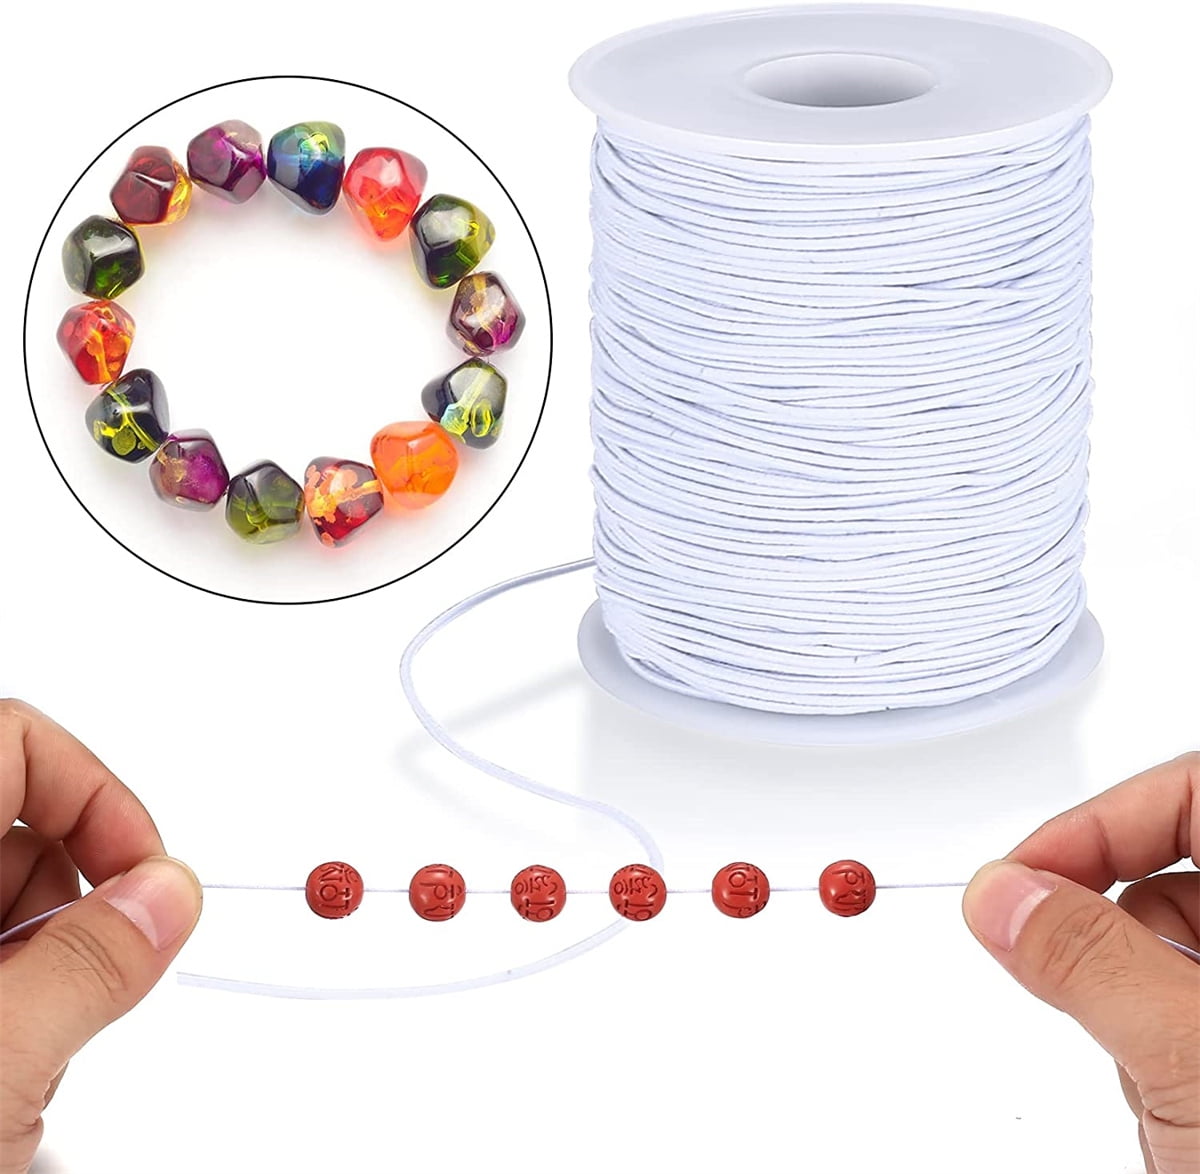  SEWACC 1 Roll Craft Thread Gift Wrapping Cord Beading Cords  Jewelry Making Rope Crafting Cord Braided Rope Hand-Woven Rope Necklace  Cords for Pendants Bracelet Rope Ribbon No Elasticity